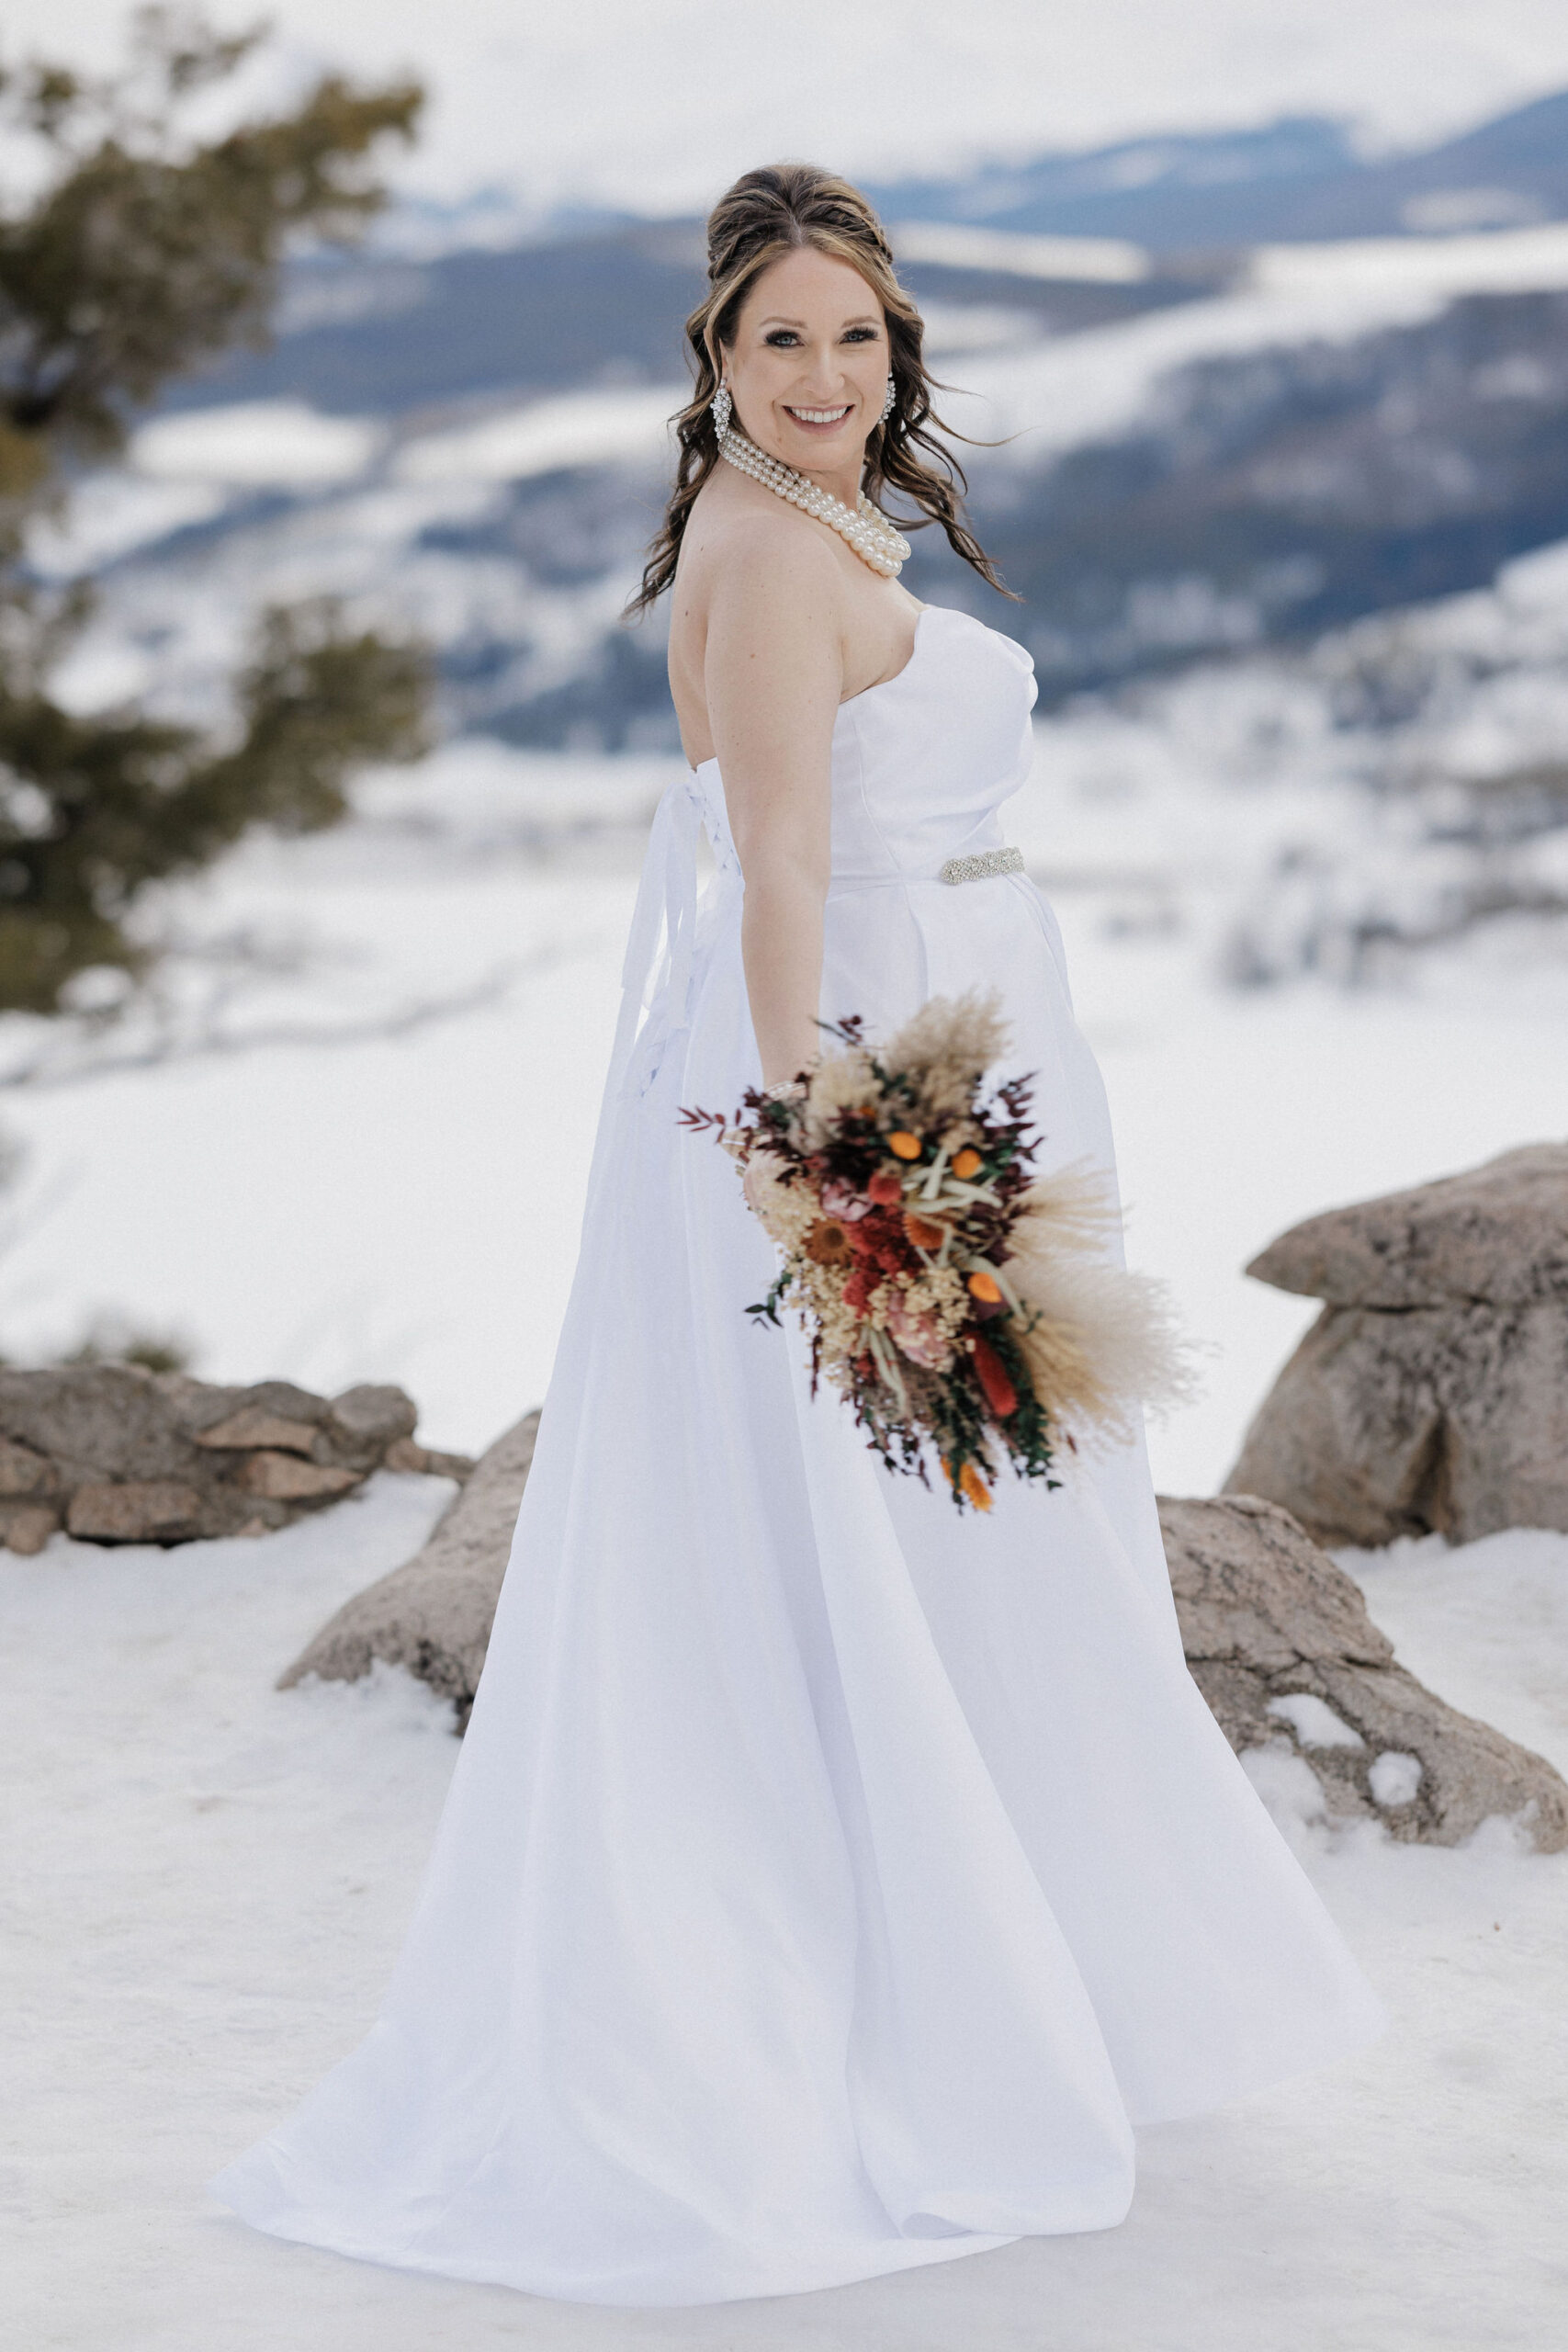 Fun bridal portraits at Sapphire Point Overlook.